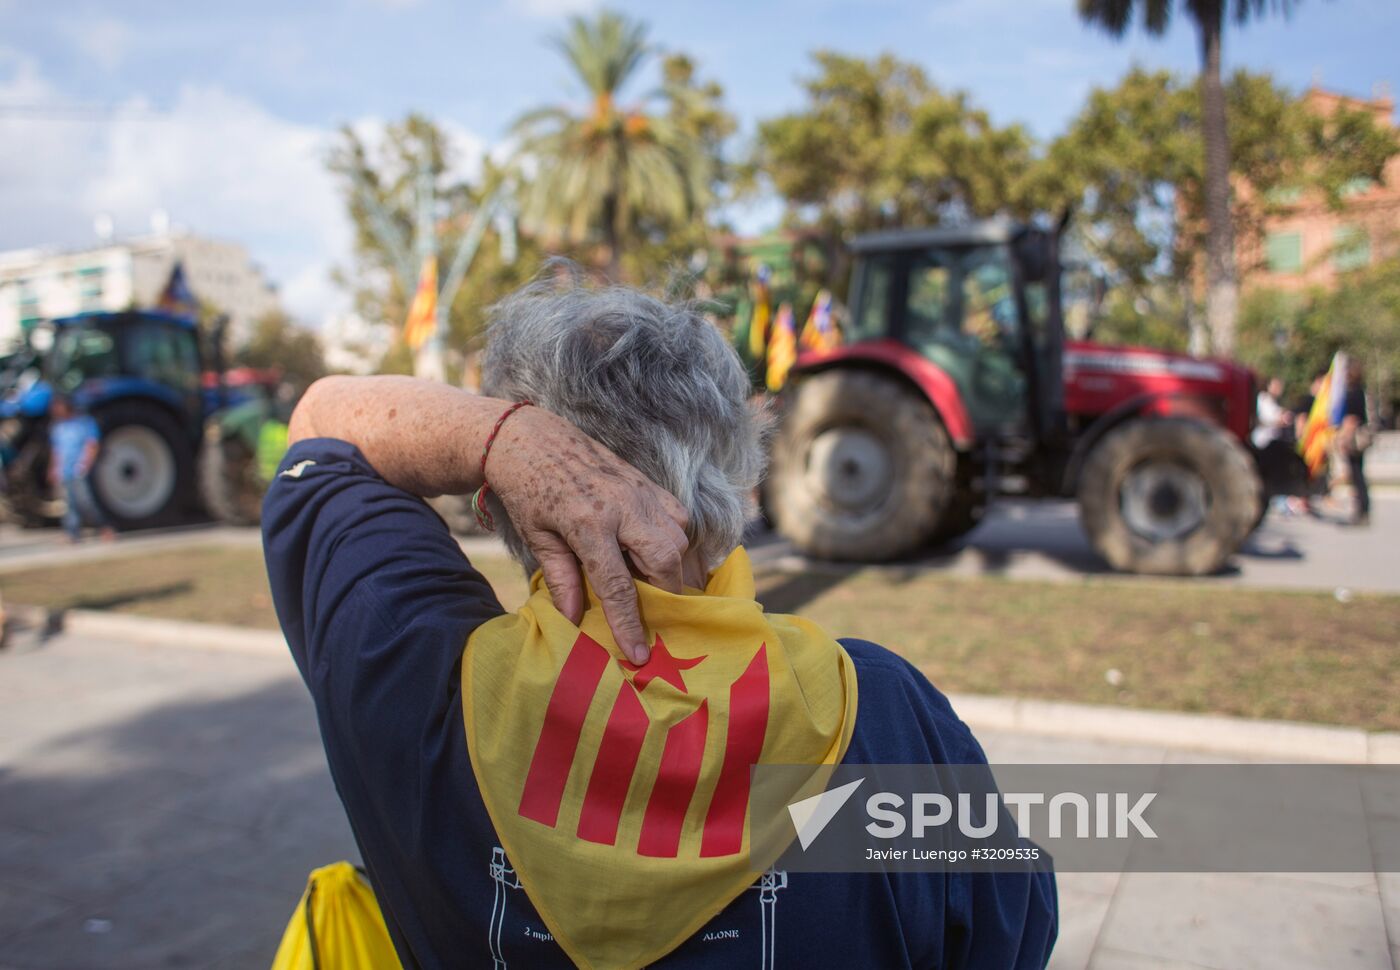 Situation outside Parliament of Catalonia in Barcelona